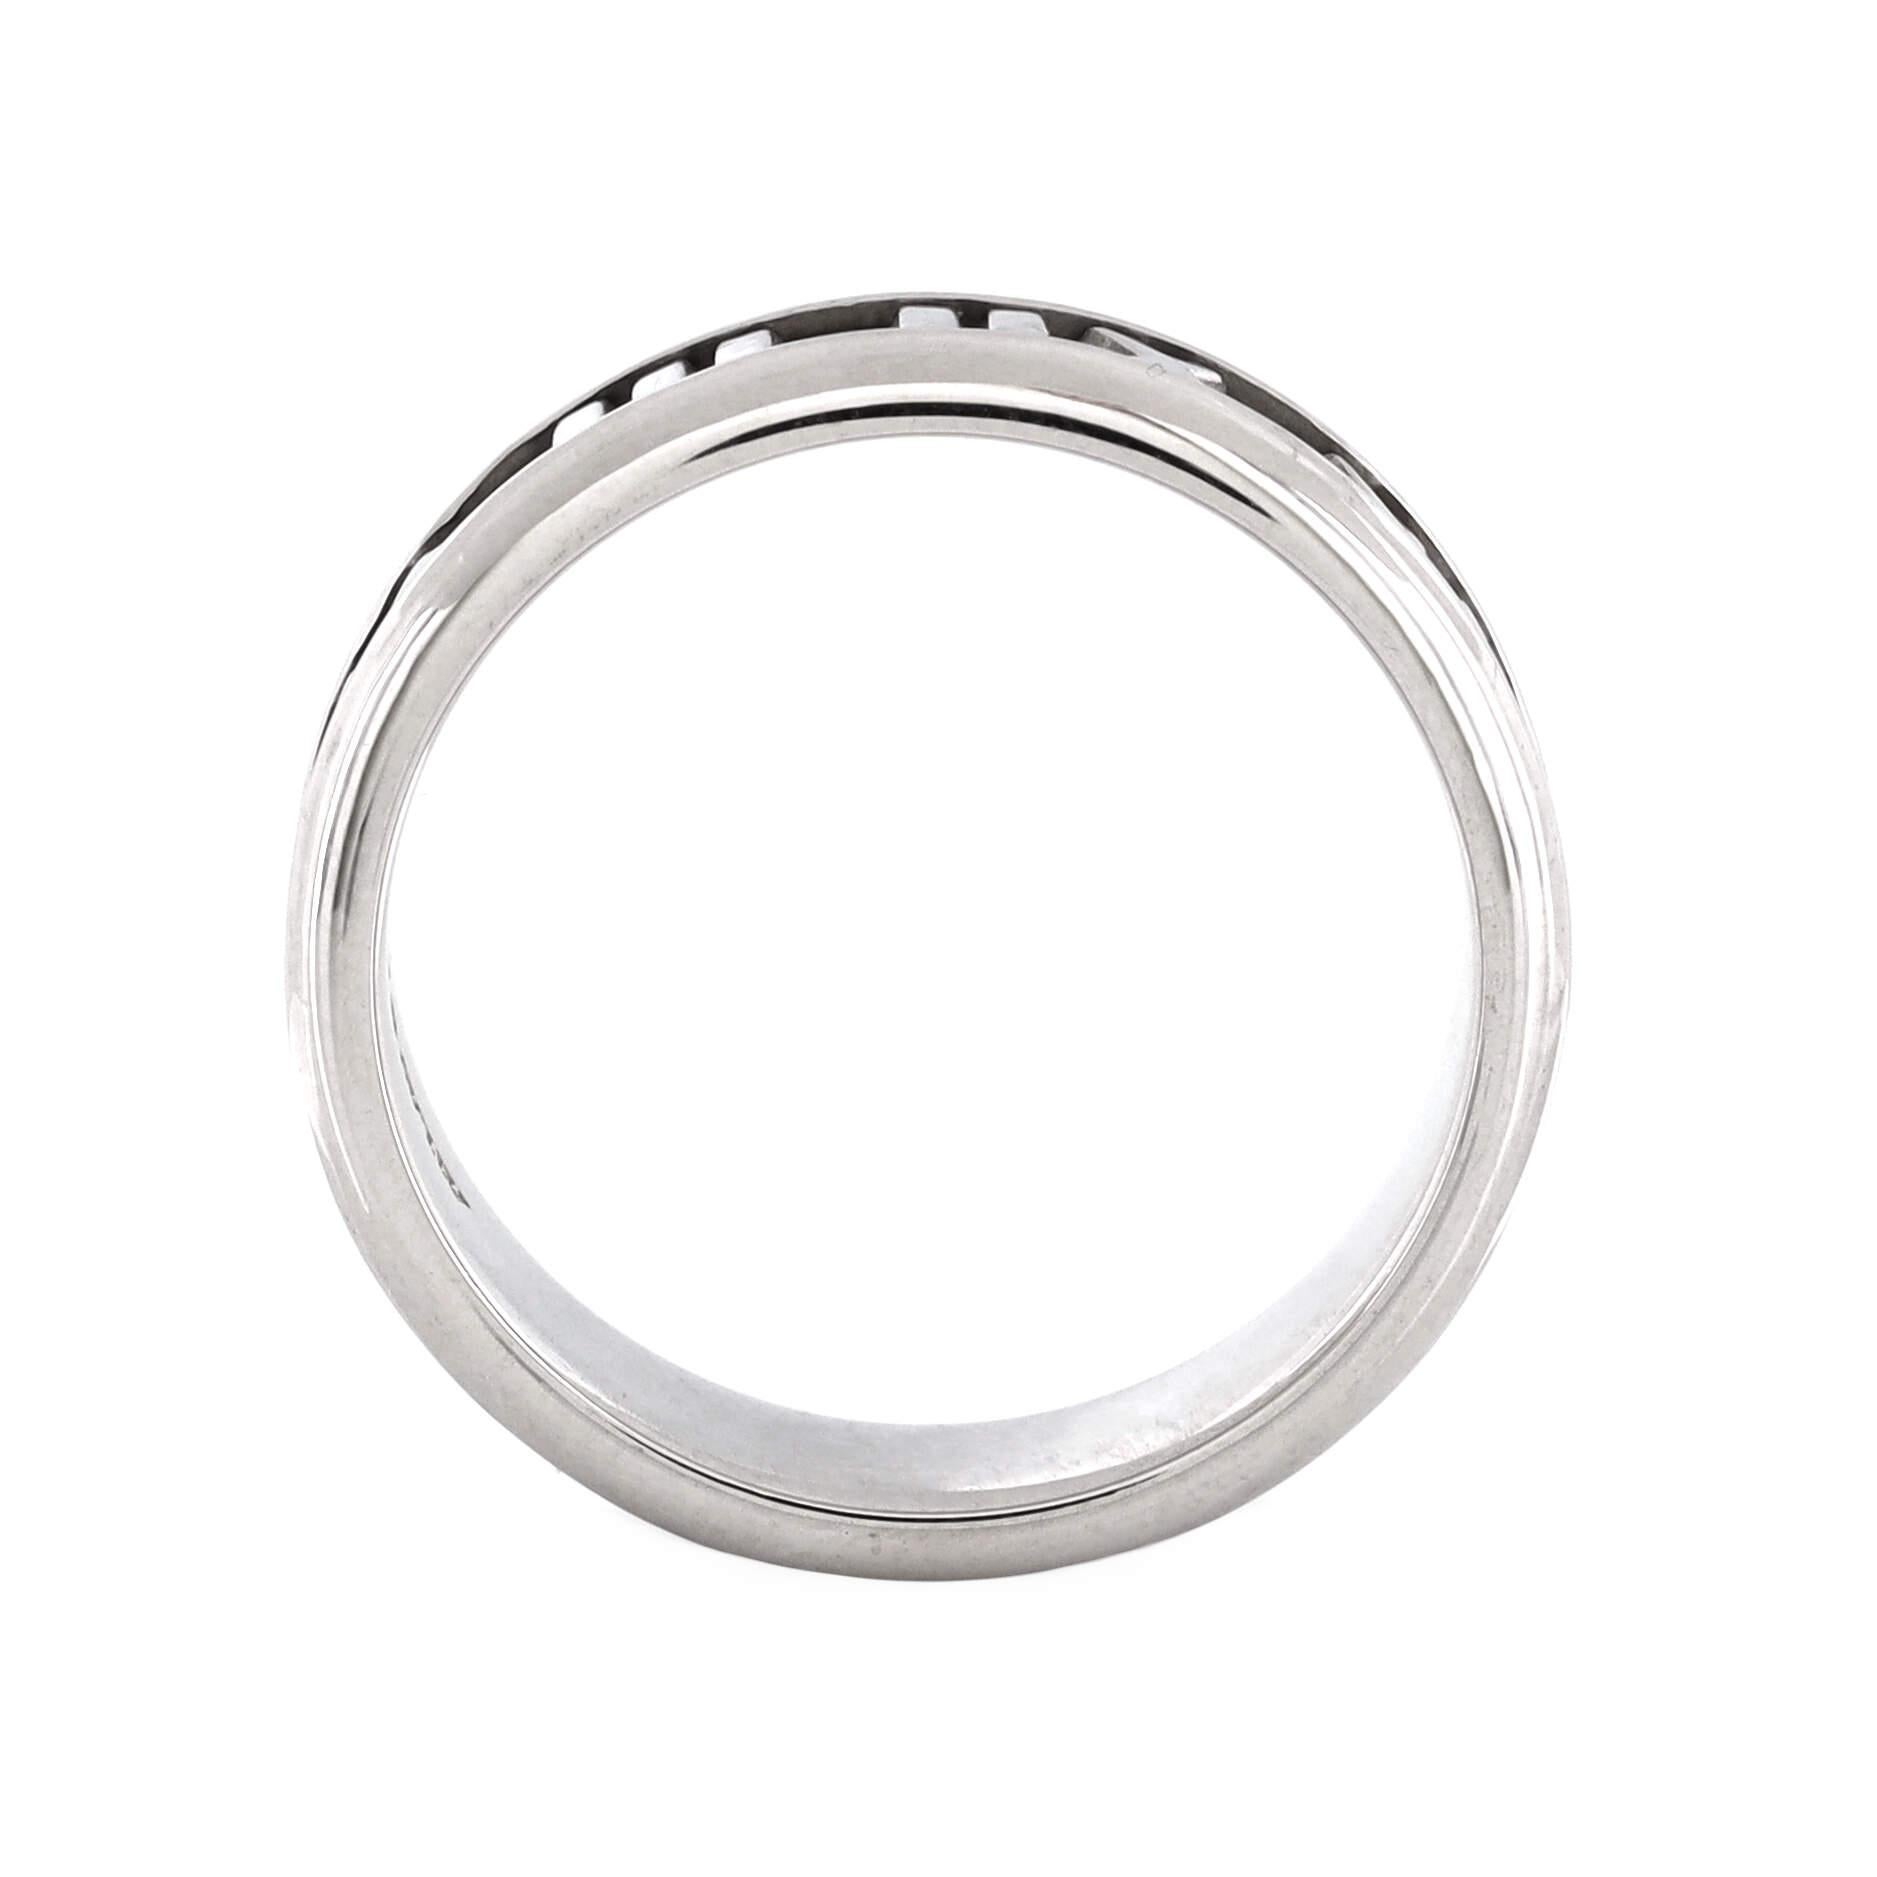 Condition: Very good. Moderate wear throughout.
Accessories: No Accessories
Measurements: Size: 10, Width: 6.95 mm
Designer: Tiffany & Co.
Model: Atlas Band Ring 18K White Gold
Exterior Color: White Gold
Item Number: 203219/13